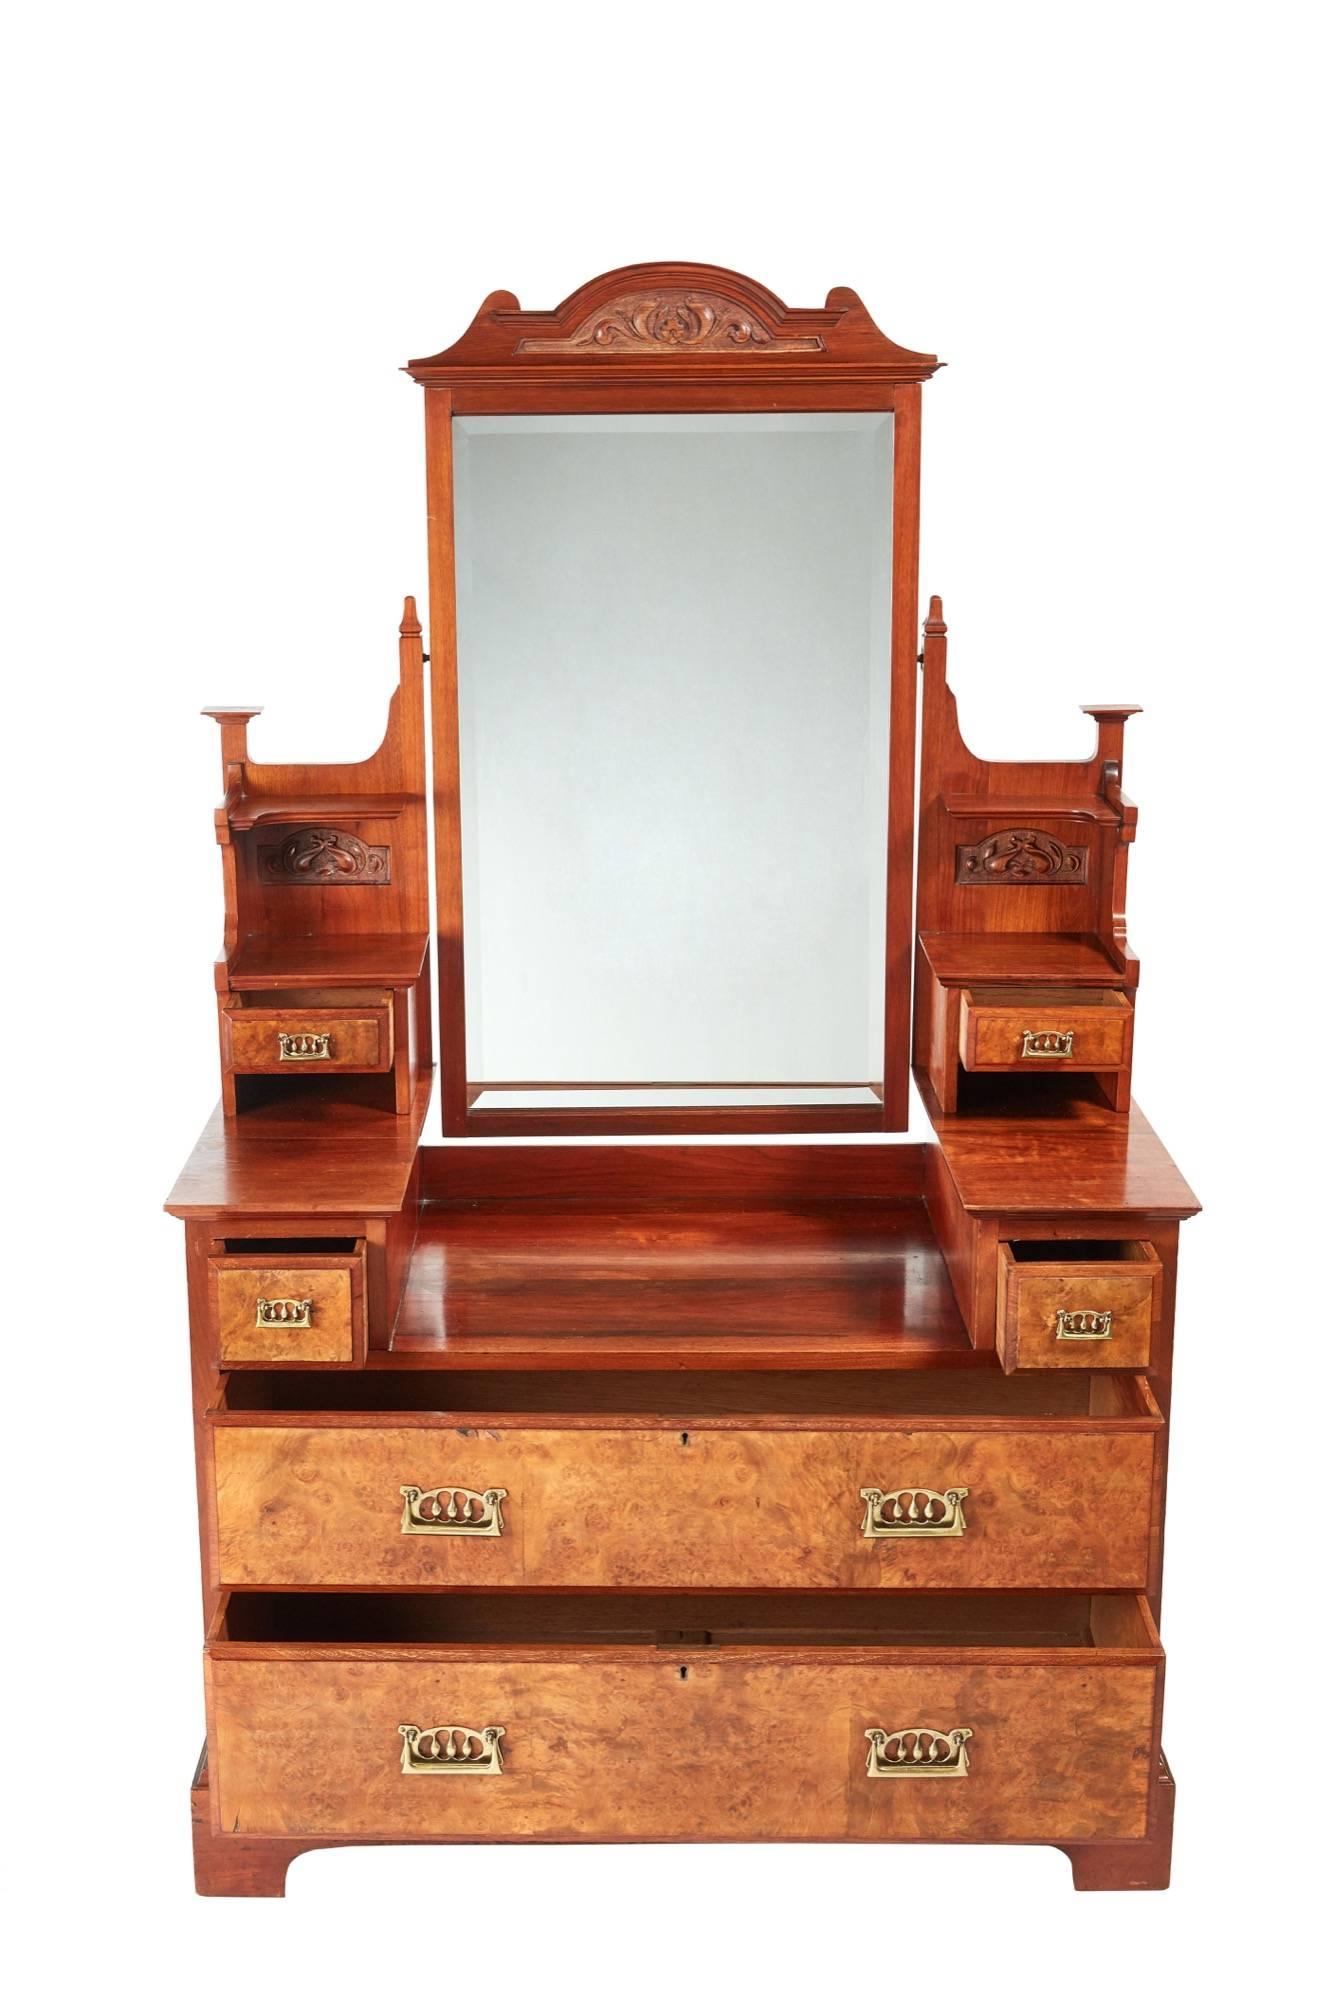 Antique burr walnut dressing chest, with a shaped tilting mirror carving to the top, lovely carved supports with drawers, unusual brass handles, the base having two short drawers and two long drawers in fantastic burr walnut with unusual brass